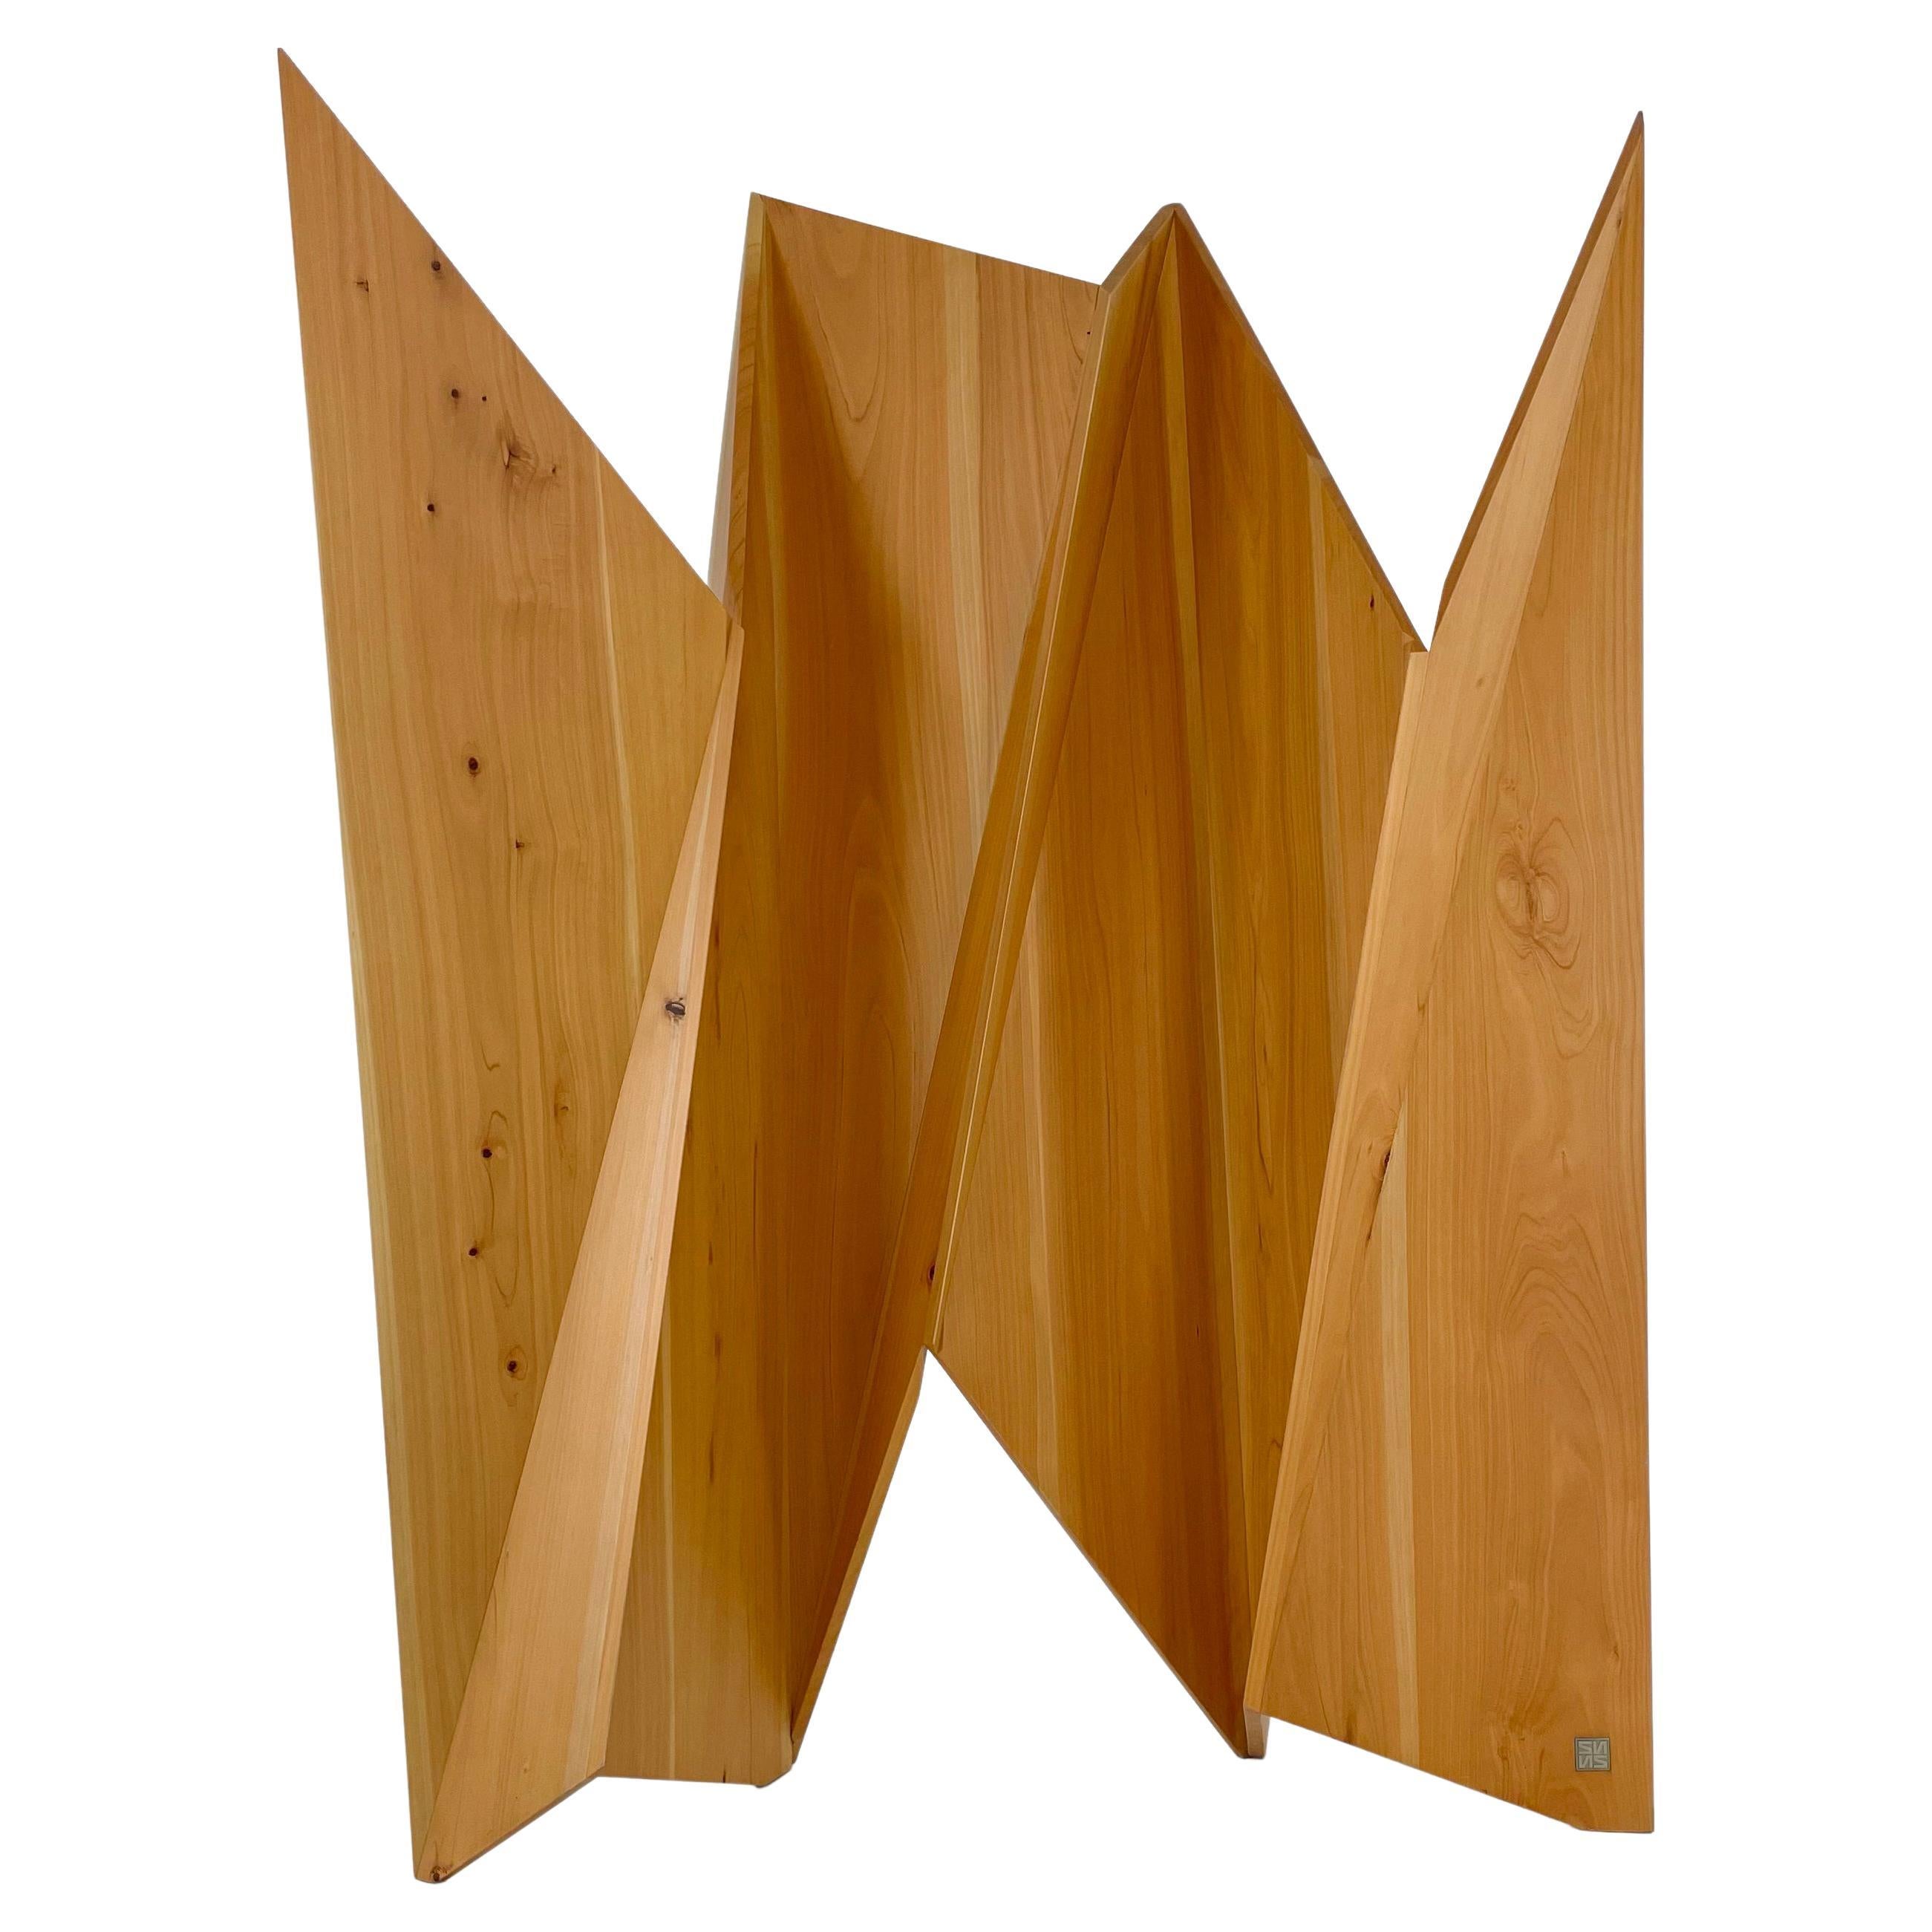 Modern Wood Sculpture Wall Screen / Room Divider by Pierre Sarkis For Sale